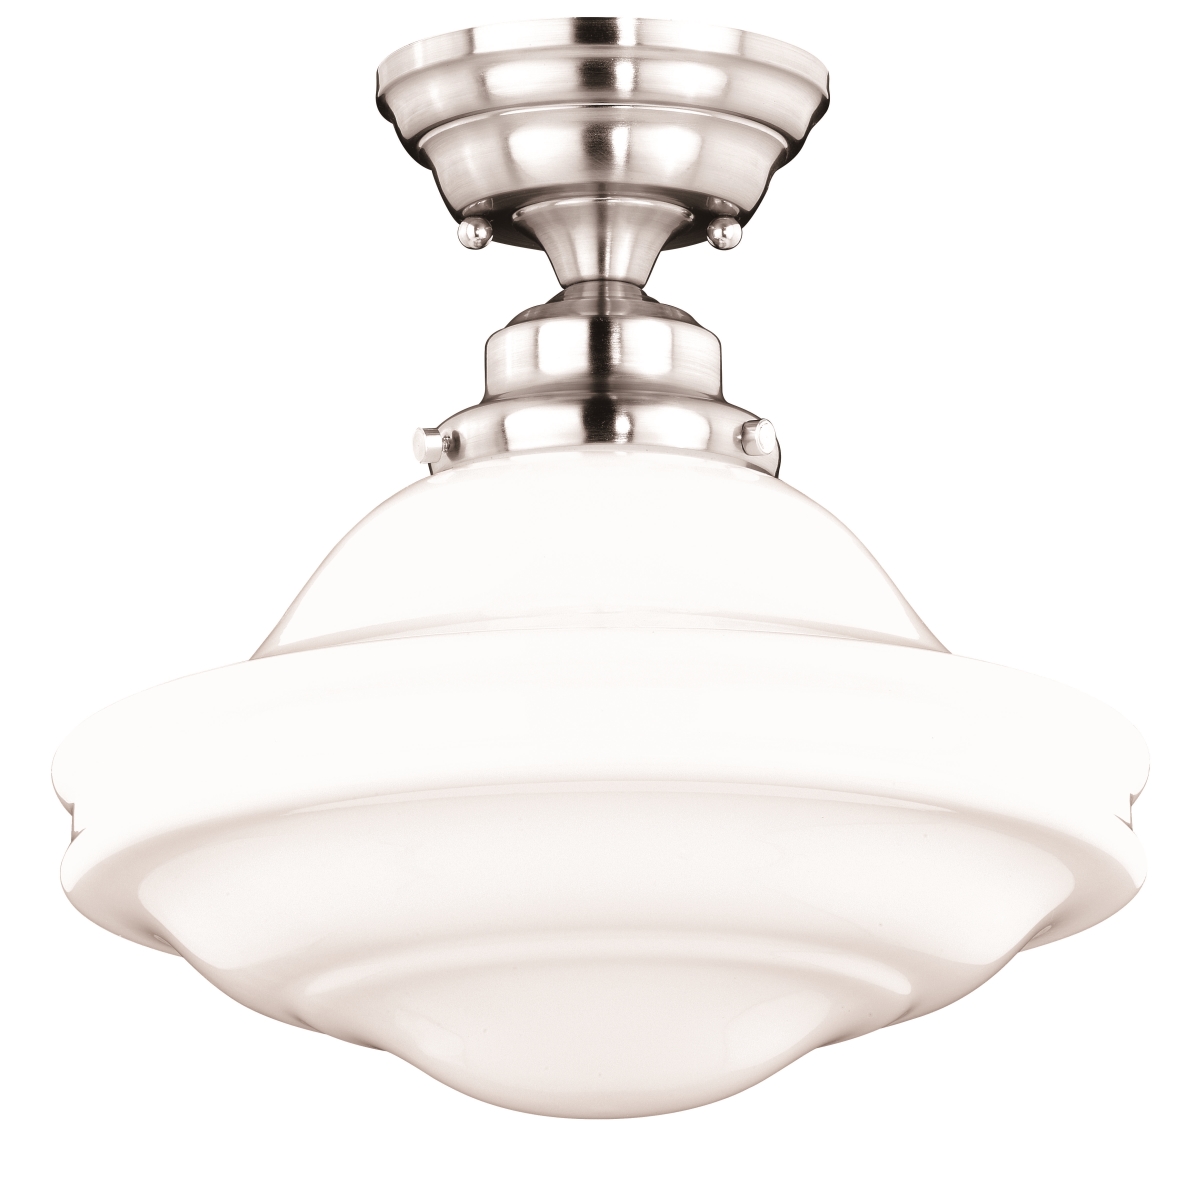 Picture of Vaxcel International C0176 12 in. Huntley Flush Mount